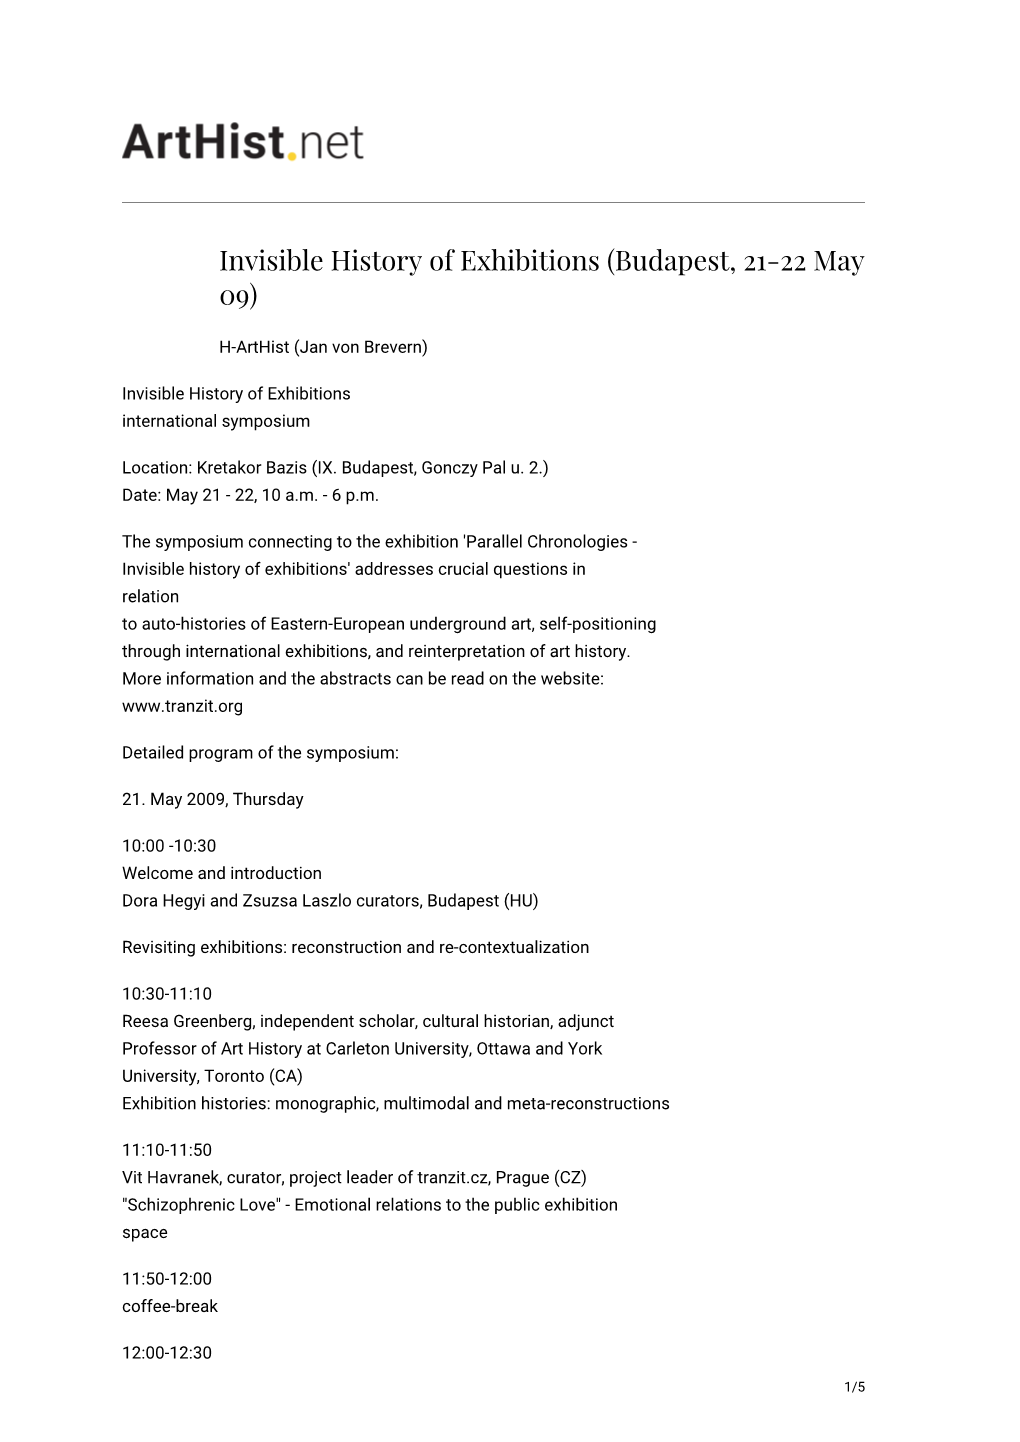 Invisible History of Exhibitions (Budapest, 21-22 May 09)